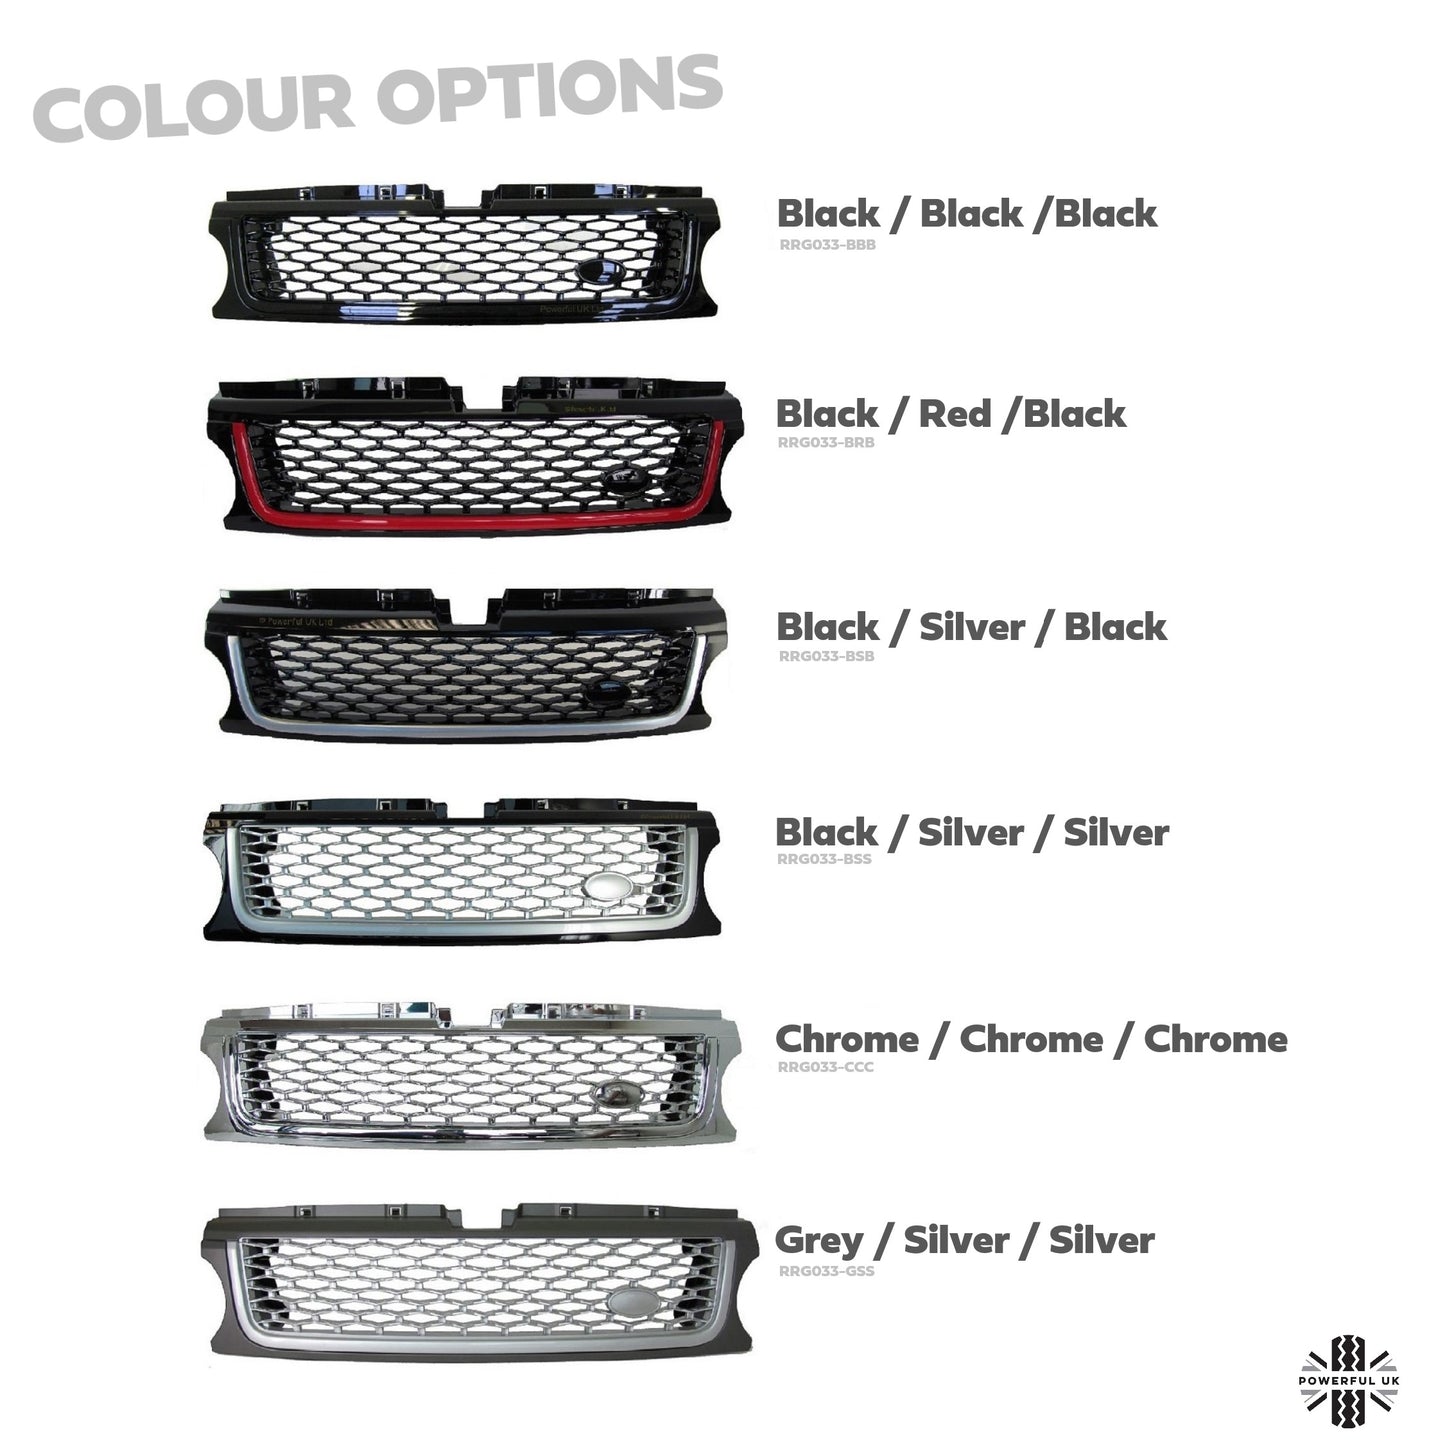 Gloss Black "Autobiography style" grille to fit Range Rover Sport 2010 on